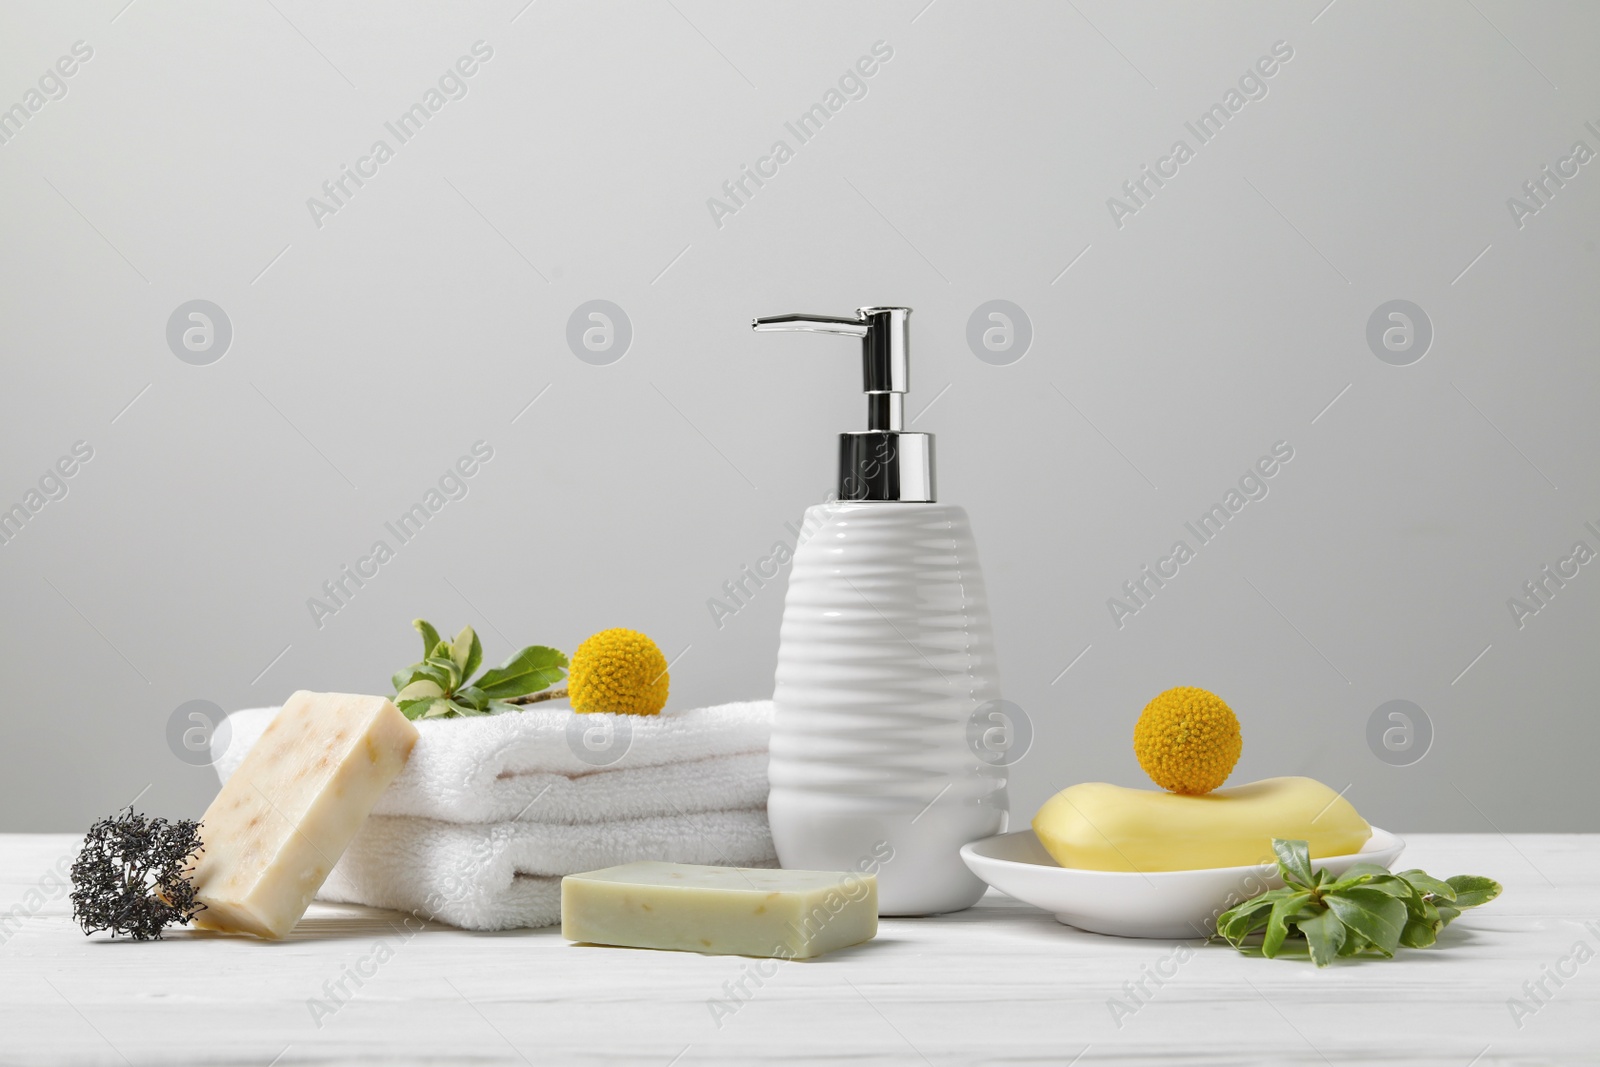 Photo of Soap bars, bottle dispenser and towels on wooden table against white background